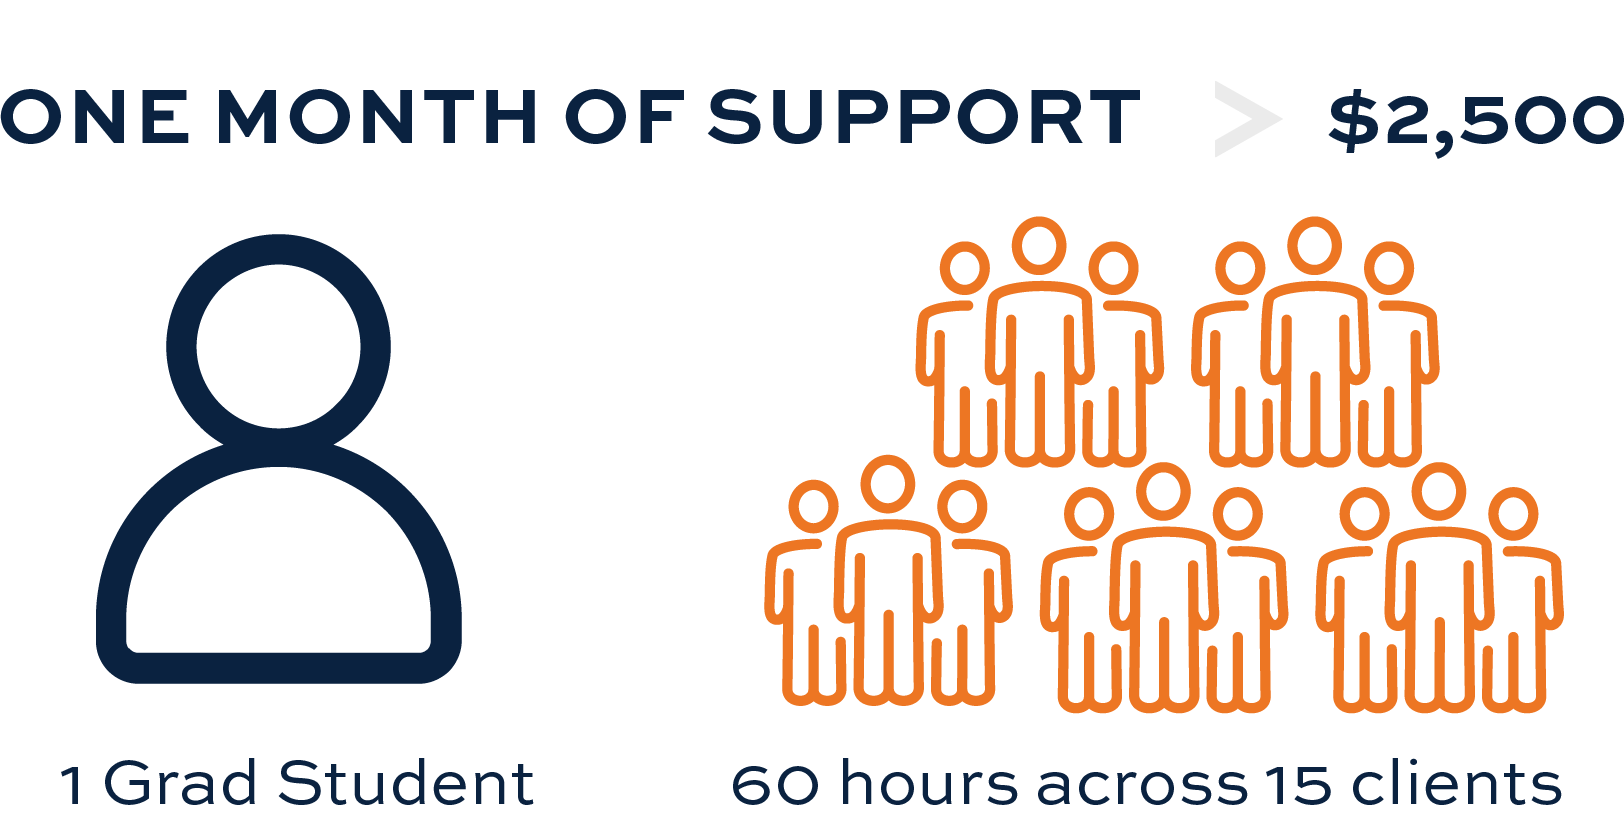 Inforgraphic depicting one month of support at 2500 dollars translates to 1 grad student and 60 hours across 15 clients